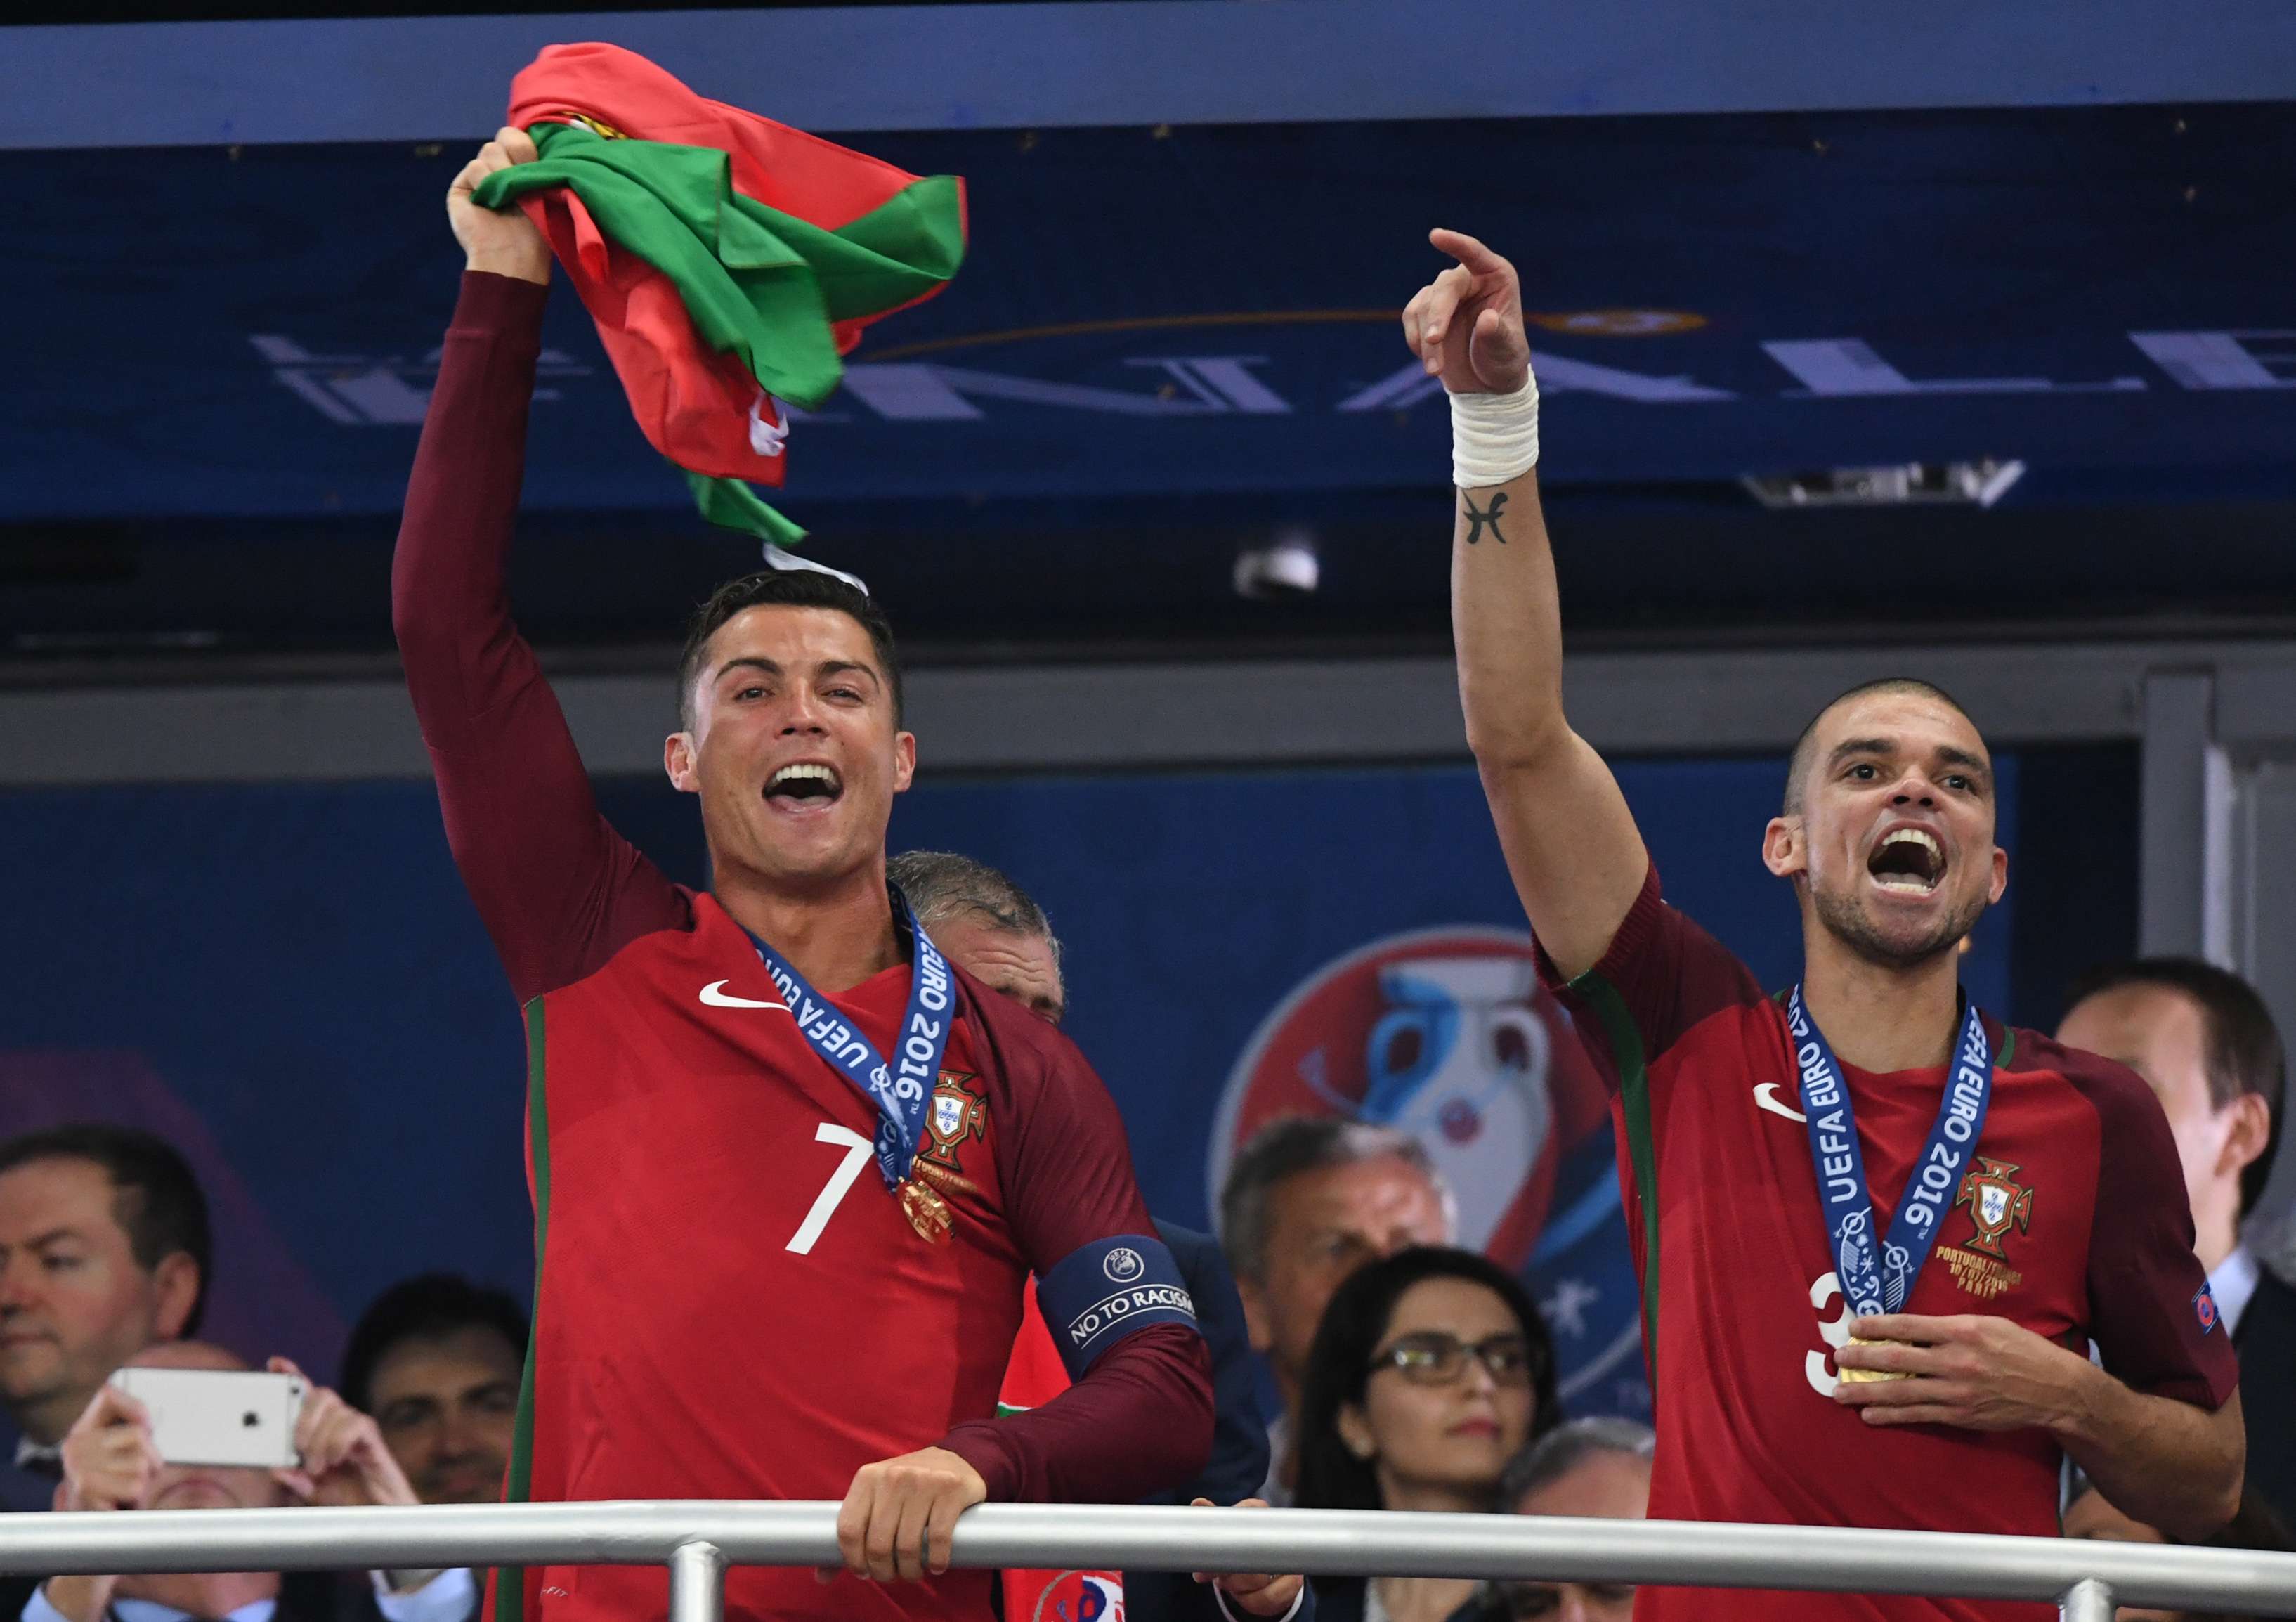 Cristiano Ronaldo and Pepe celebrate after beating France 1-0 in the Euro 2016 final in Paris. Photo: Xinhua